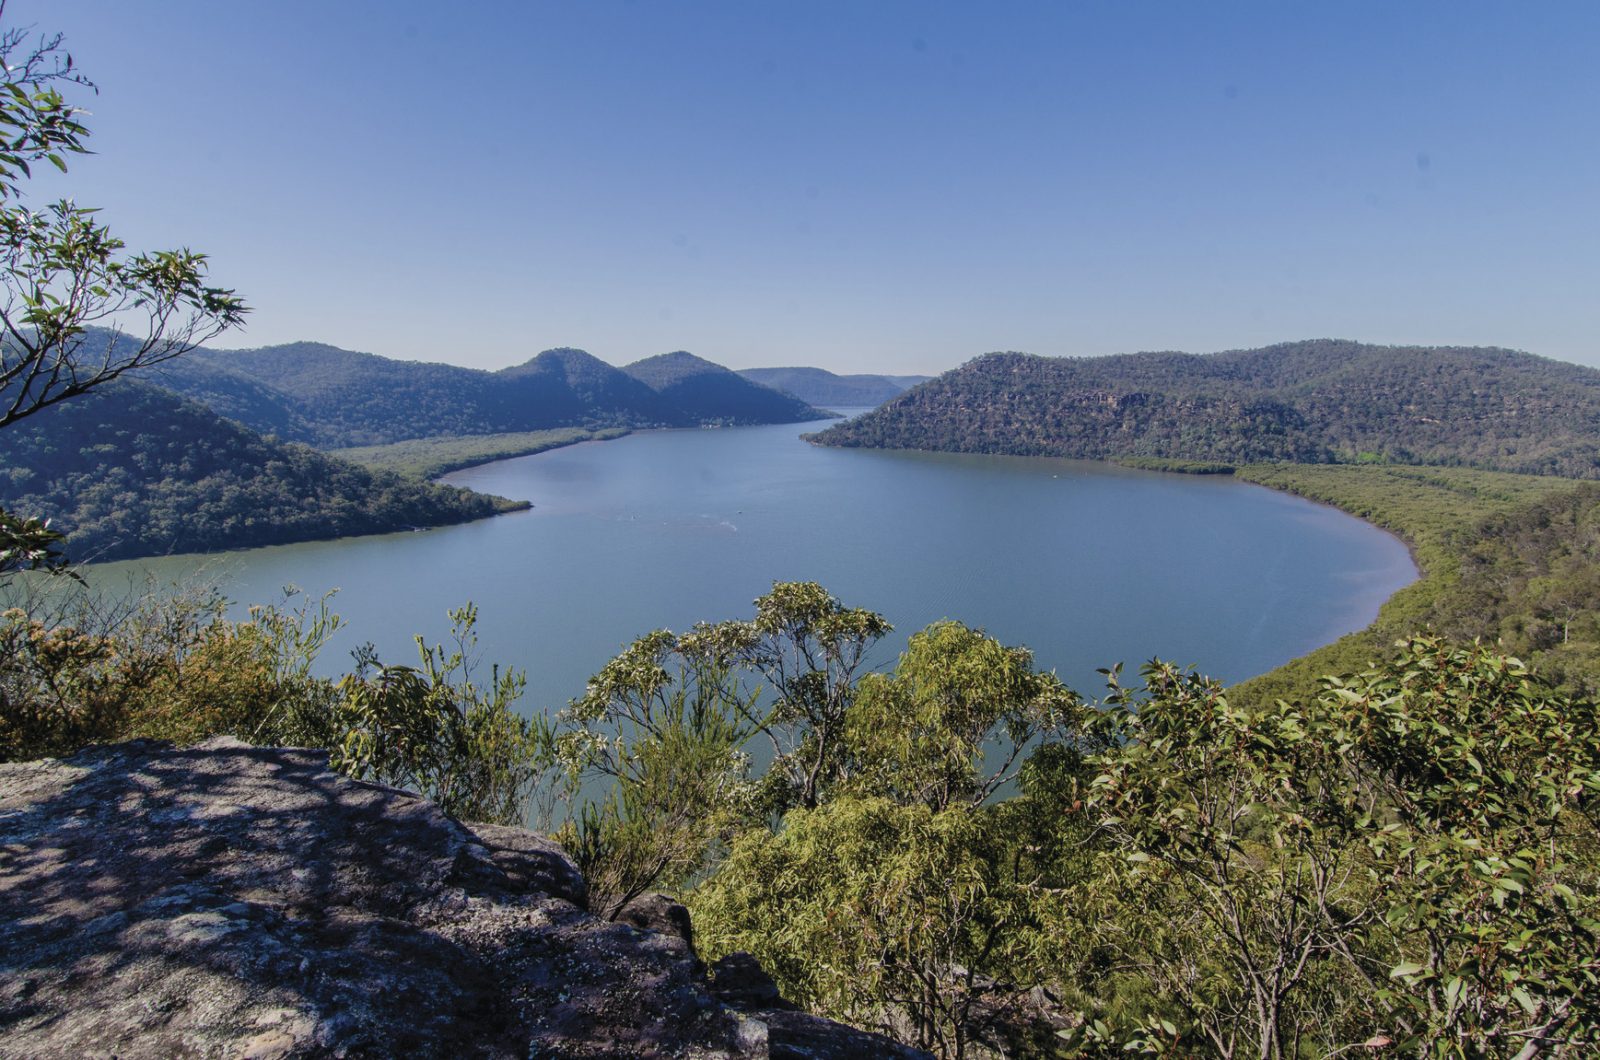 View down to the winding Hawkesbury River from Marramarra National Park. Photo: John Spencer/DPIE